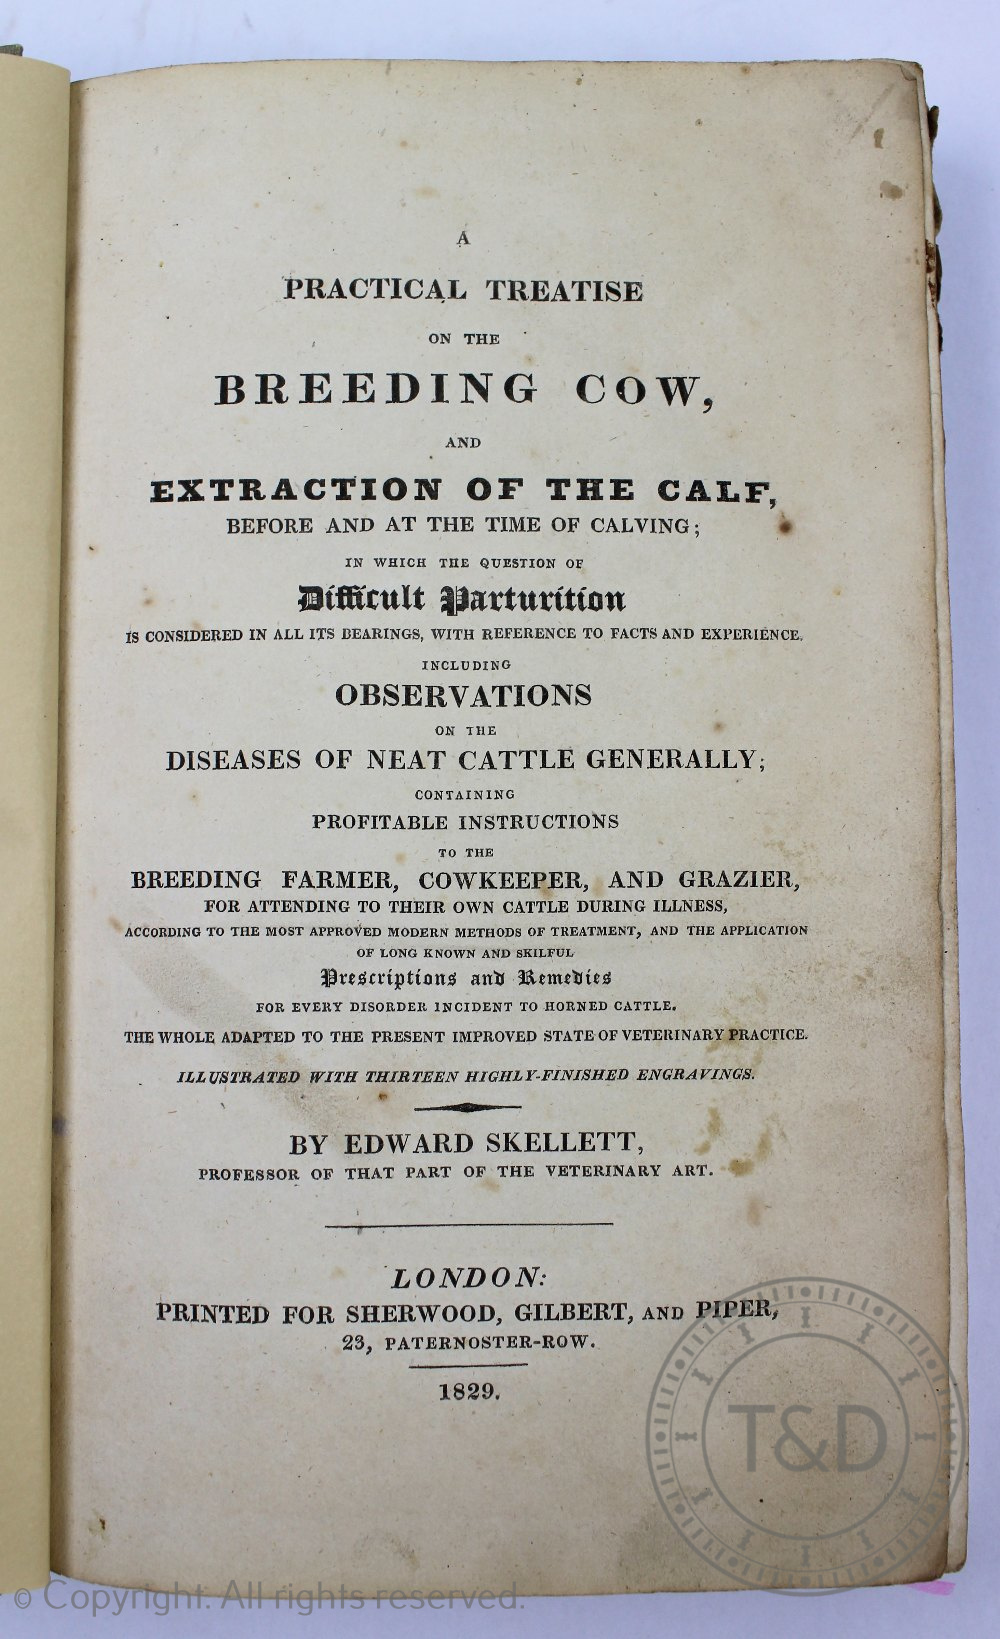 SKELLETT (E), A PRACTICAL TREATISE ON THE BREEDING COW, engraved plates, - Image 3 of 4